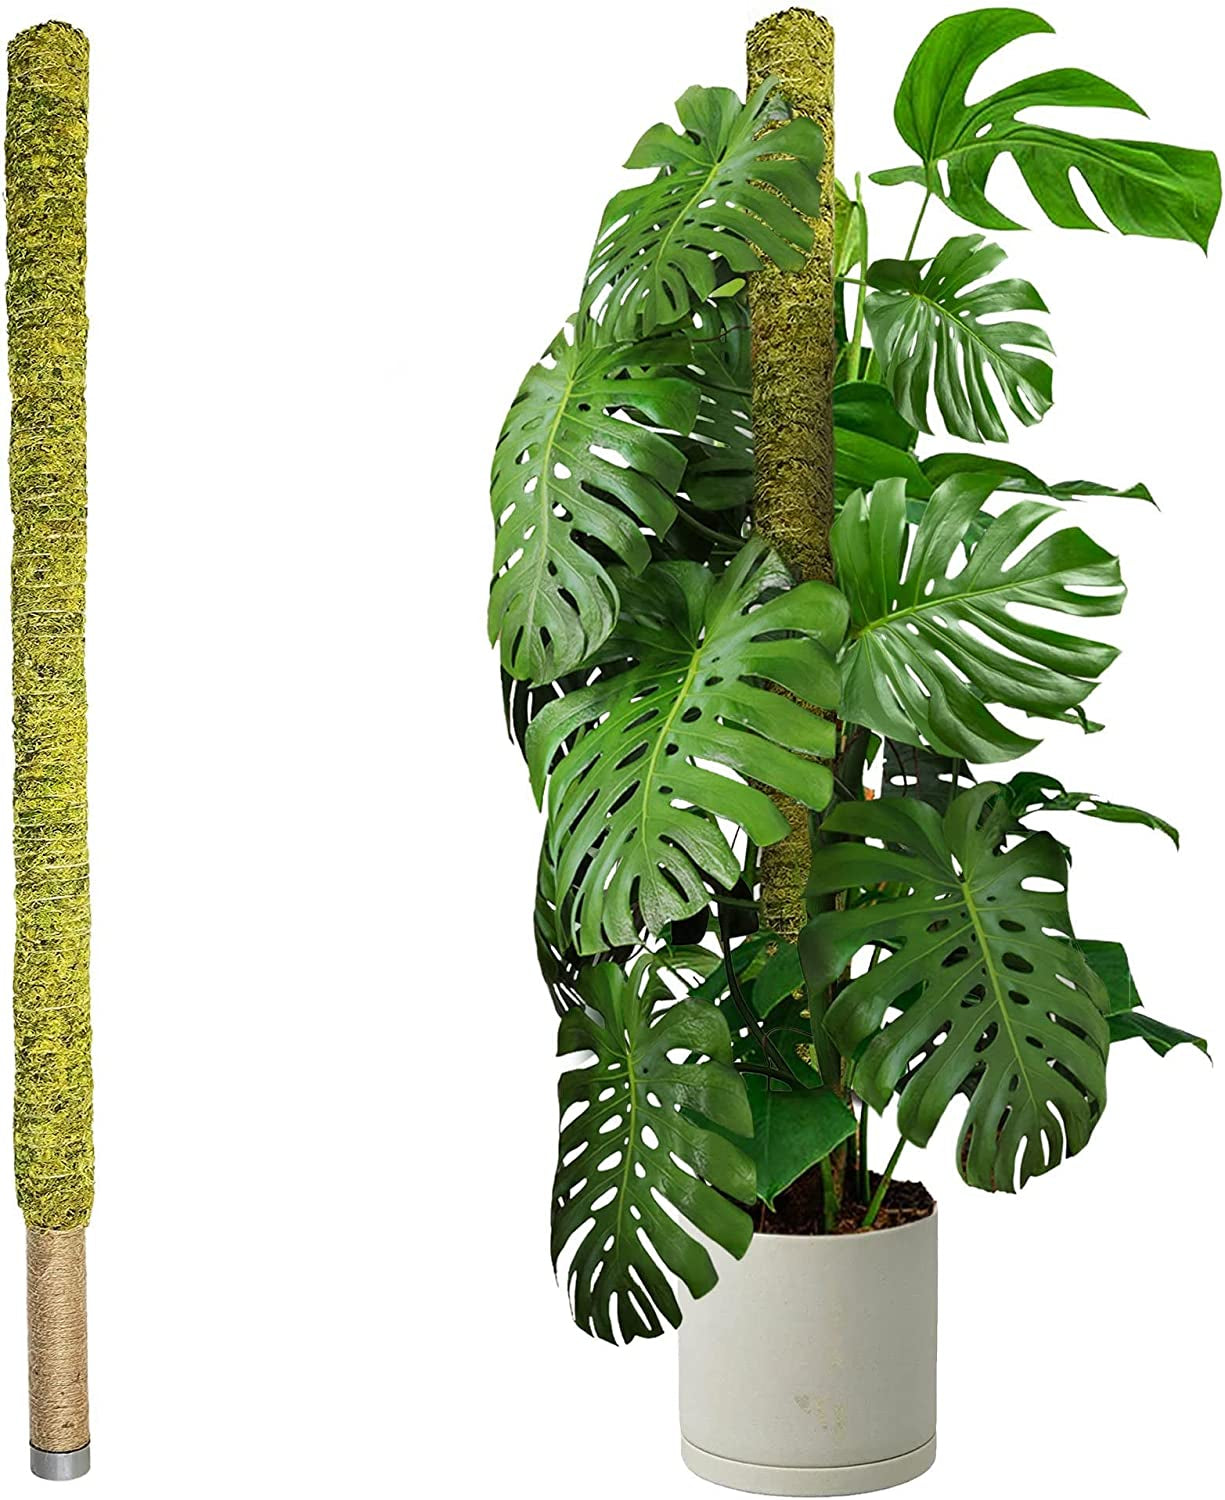 Duspro, Duspro 59 Inches Large Moss Pole for Plants Monstera, Tall Indoor Plant Stake Support for Big Climbing Pothos Long Handmade Forest Moss Totem/Giant Trellis (Extra Large Size)